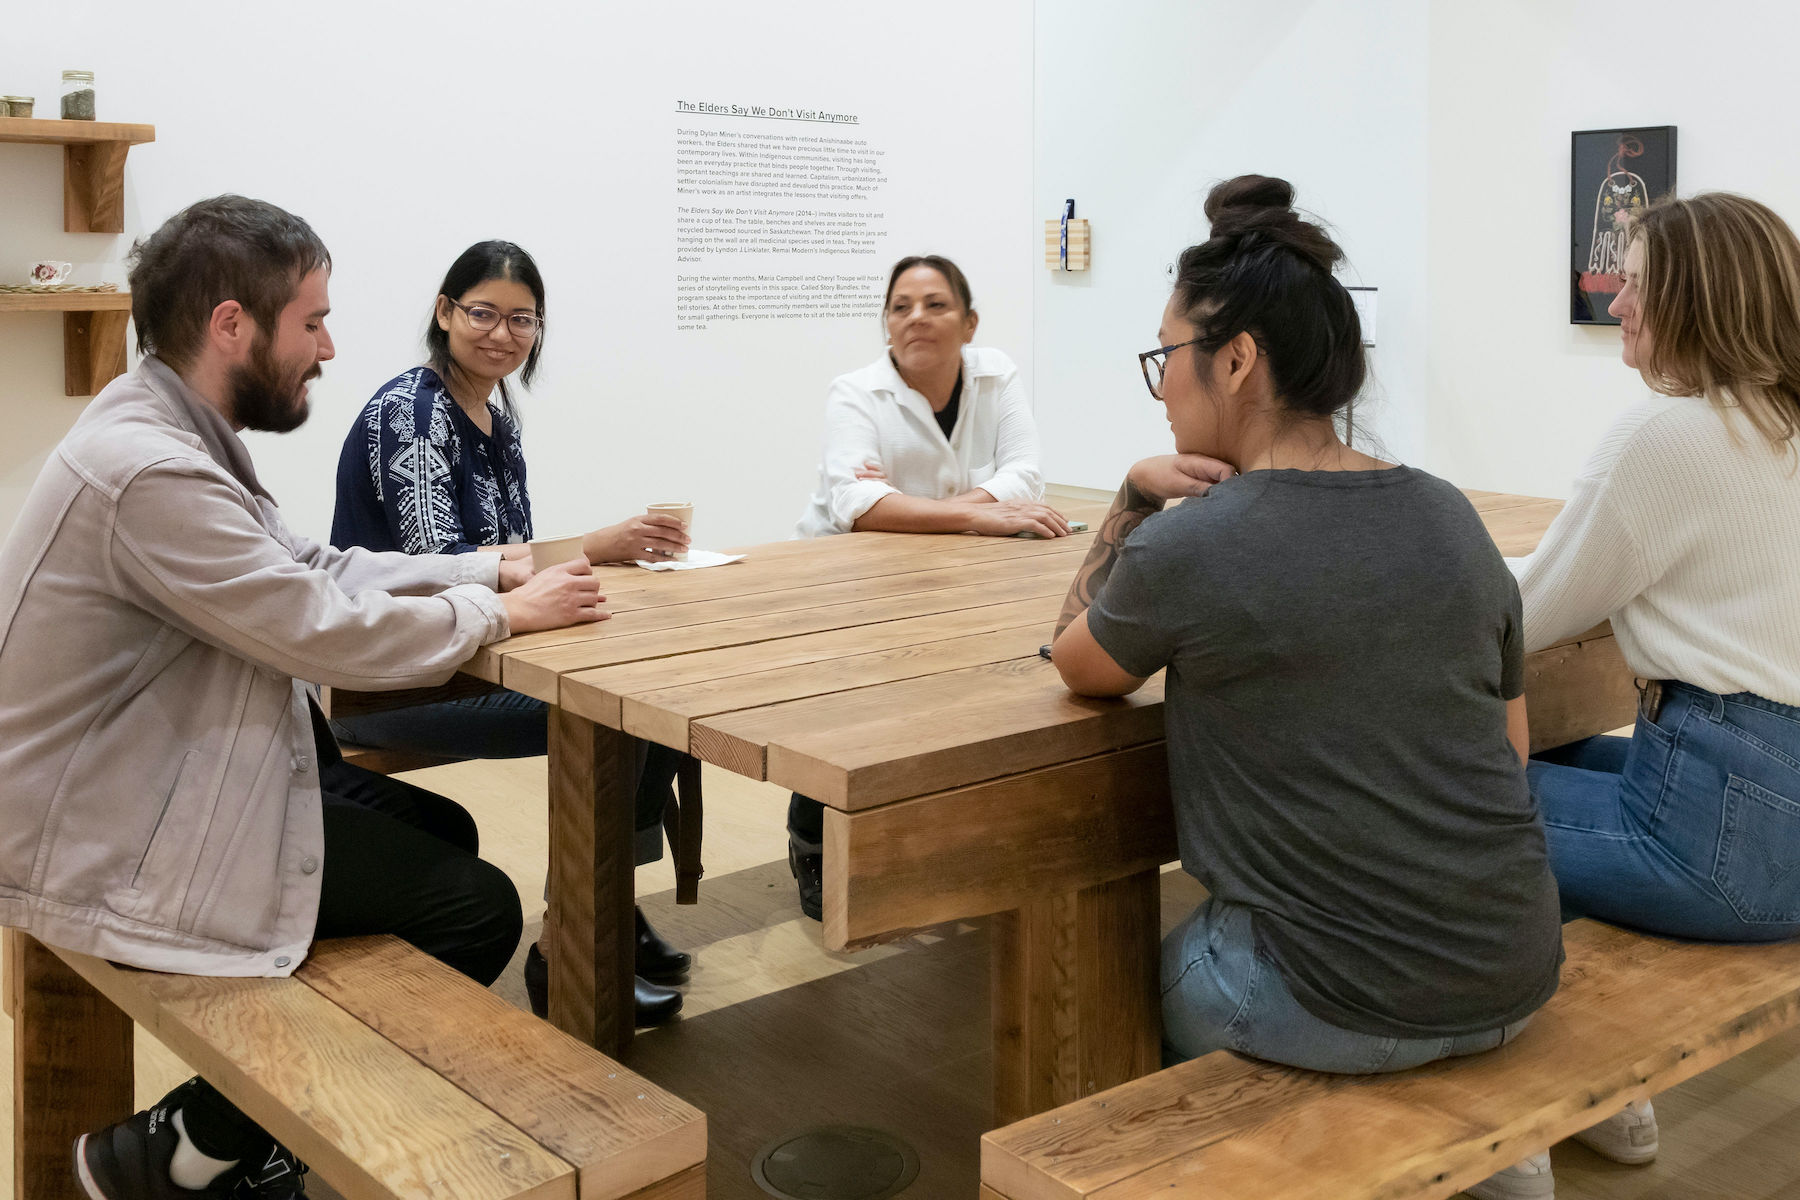 A photo of a group of people sitting around a table in an art gallery